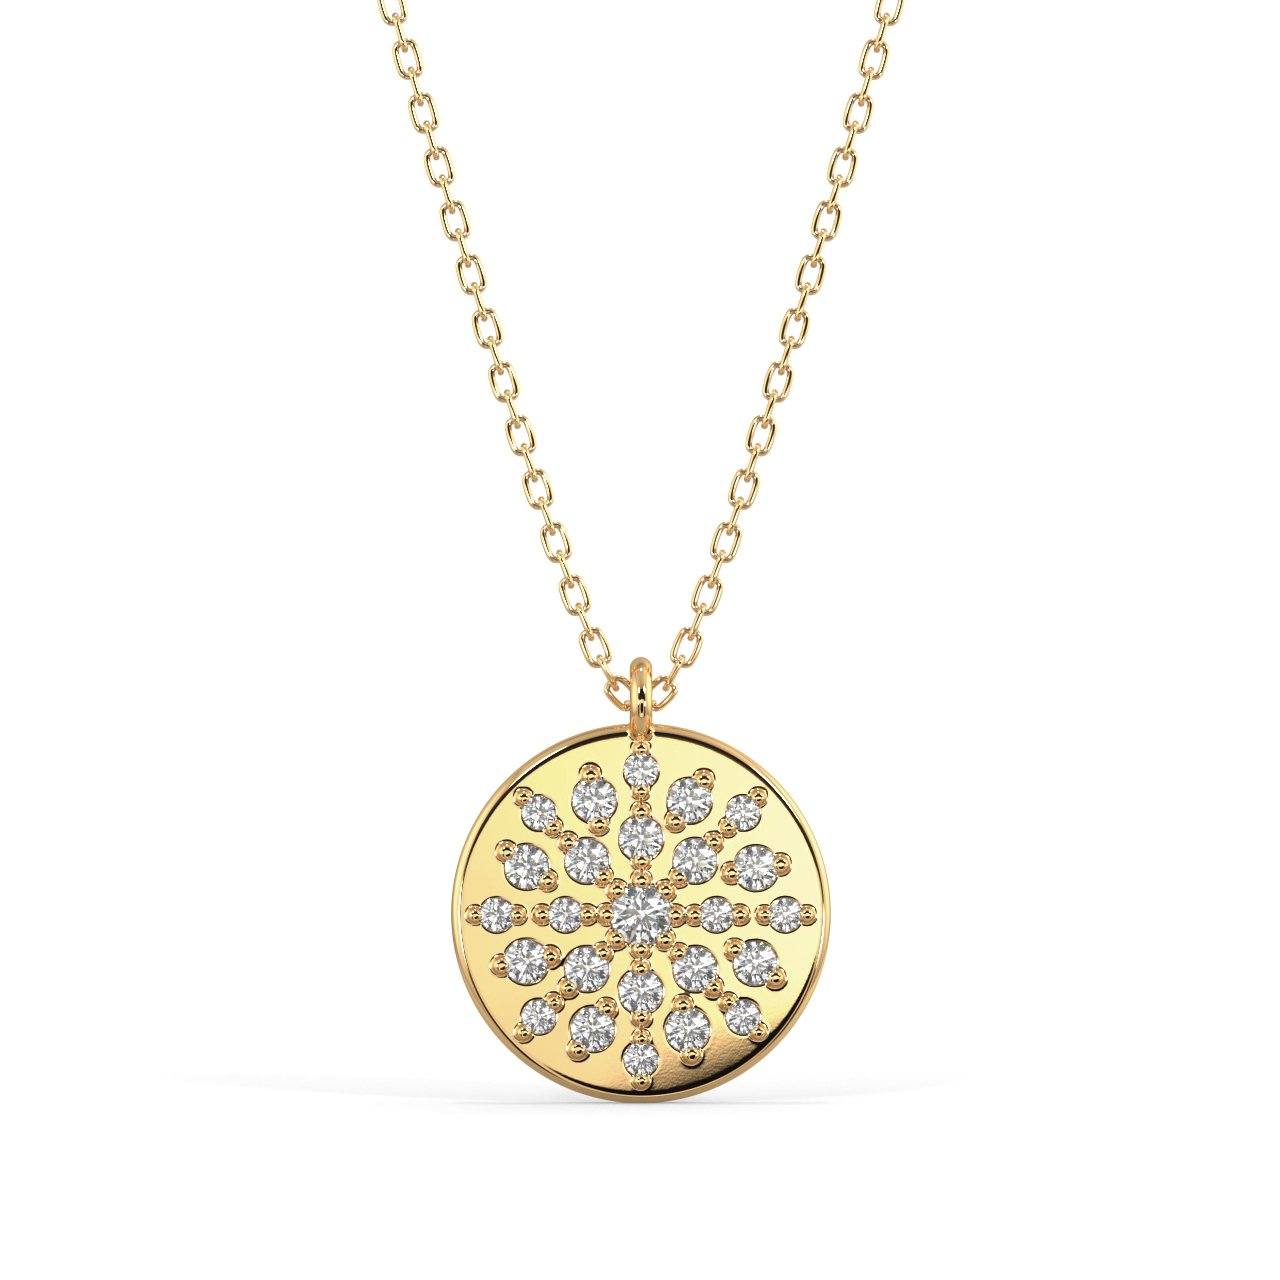 The Golden Rays Pendant Necklace Pendant Silvermist Jewelry YELLOW GOLD 